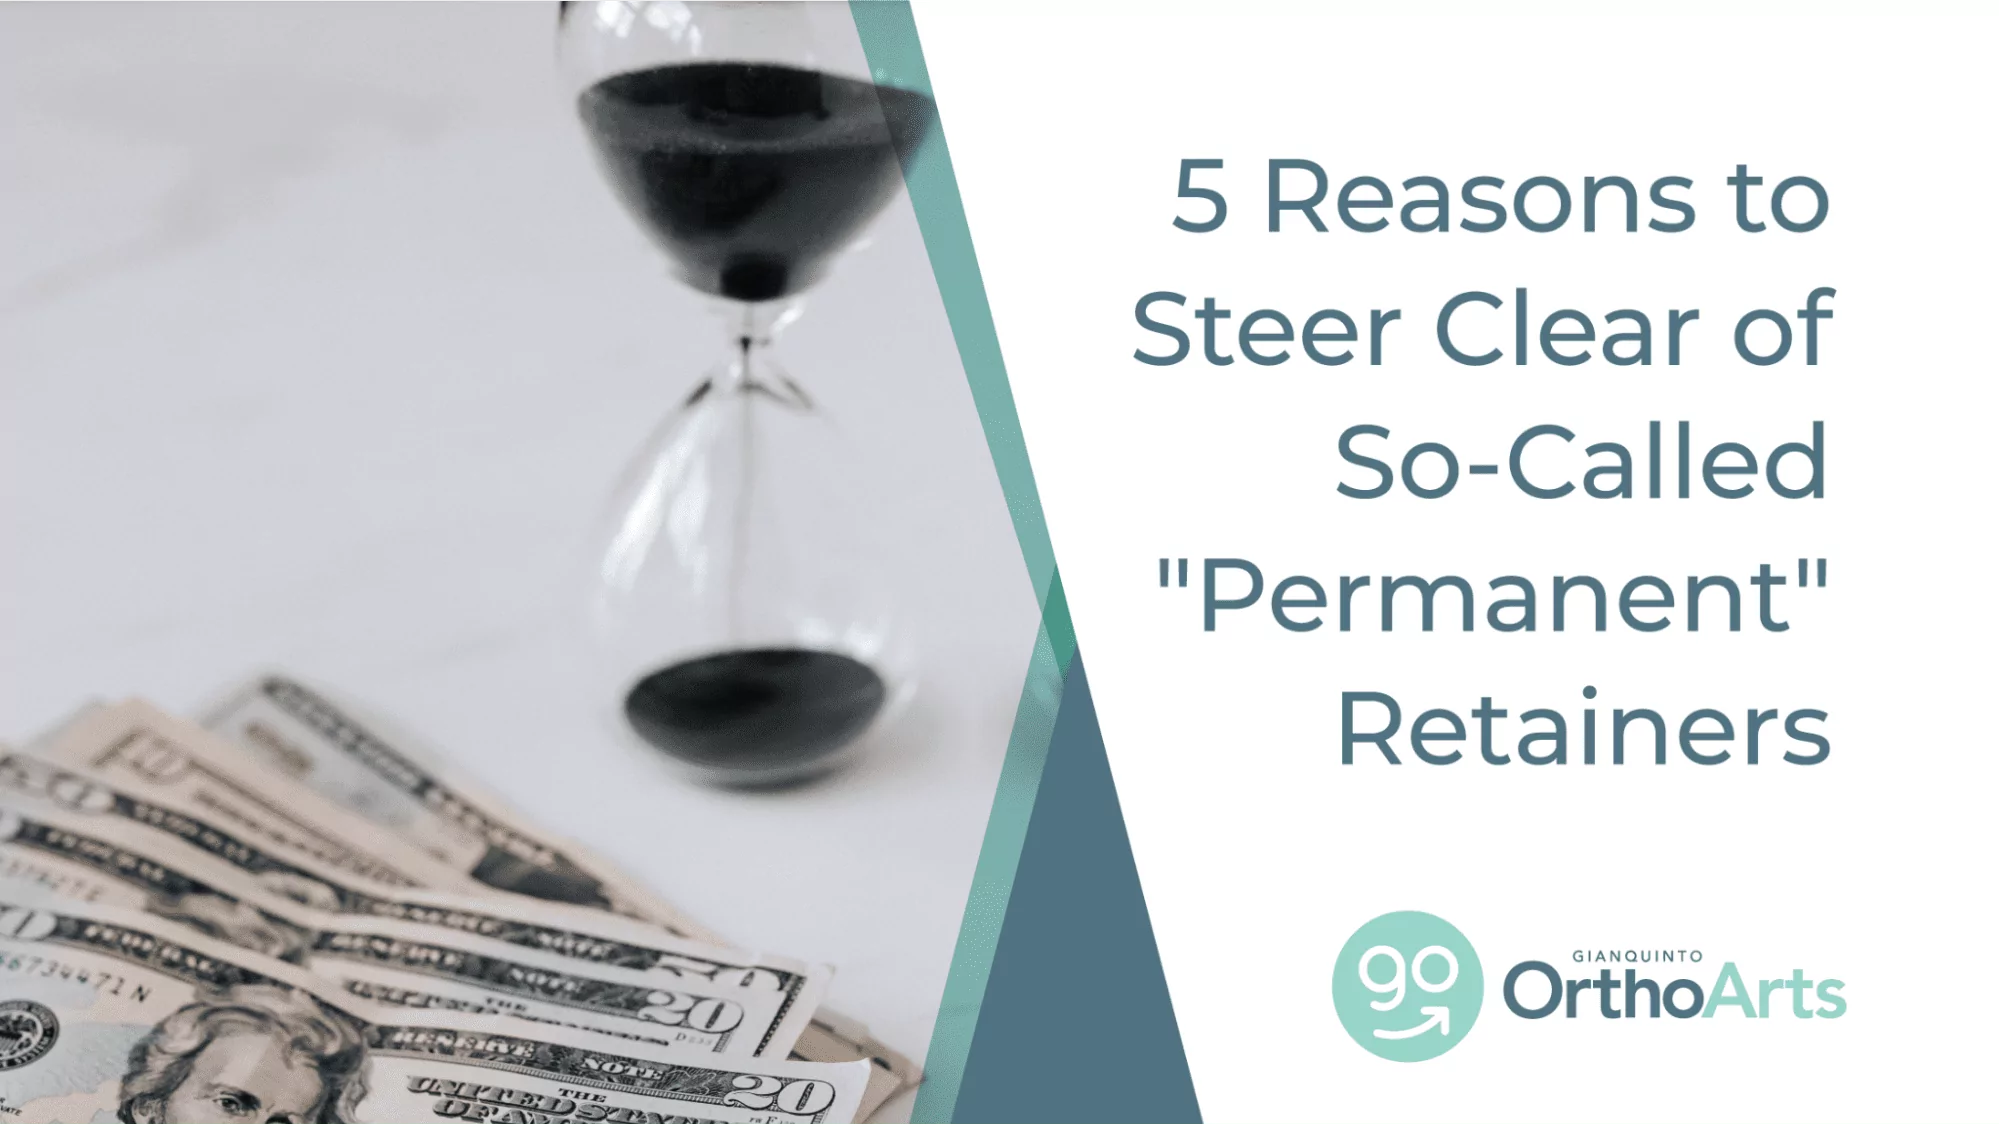 5 Reasons to Steer Clear of So-Called "Permanent" Retainers